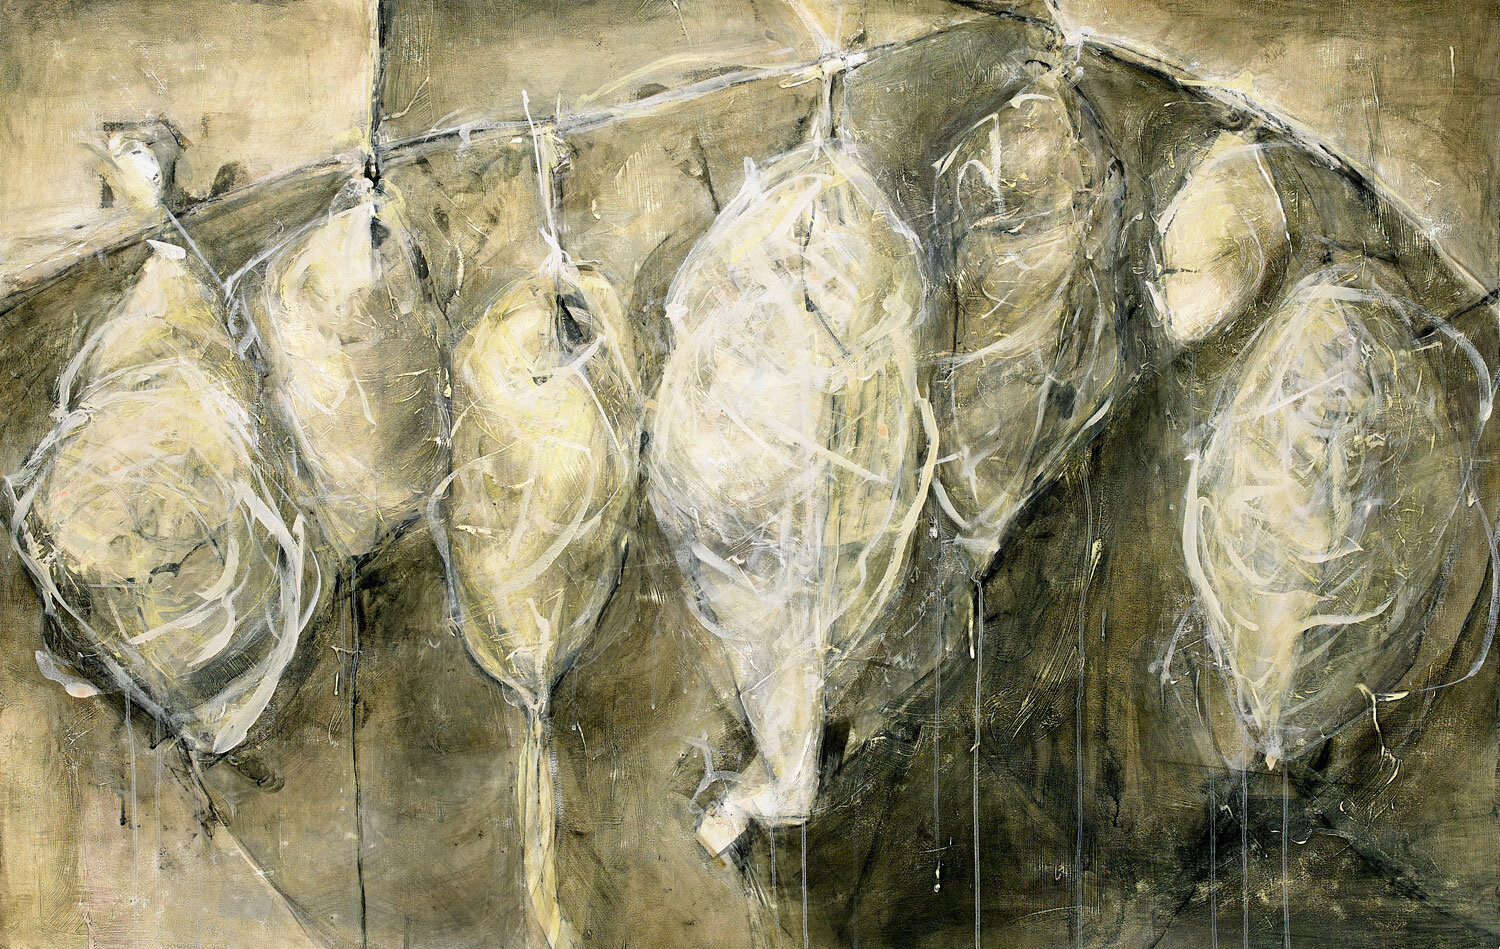  FAMILIA COCOON 1   acrylic on paper  40” x 64”  2020  